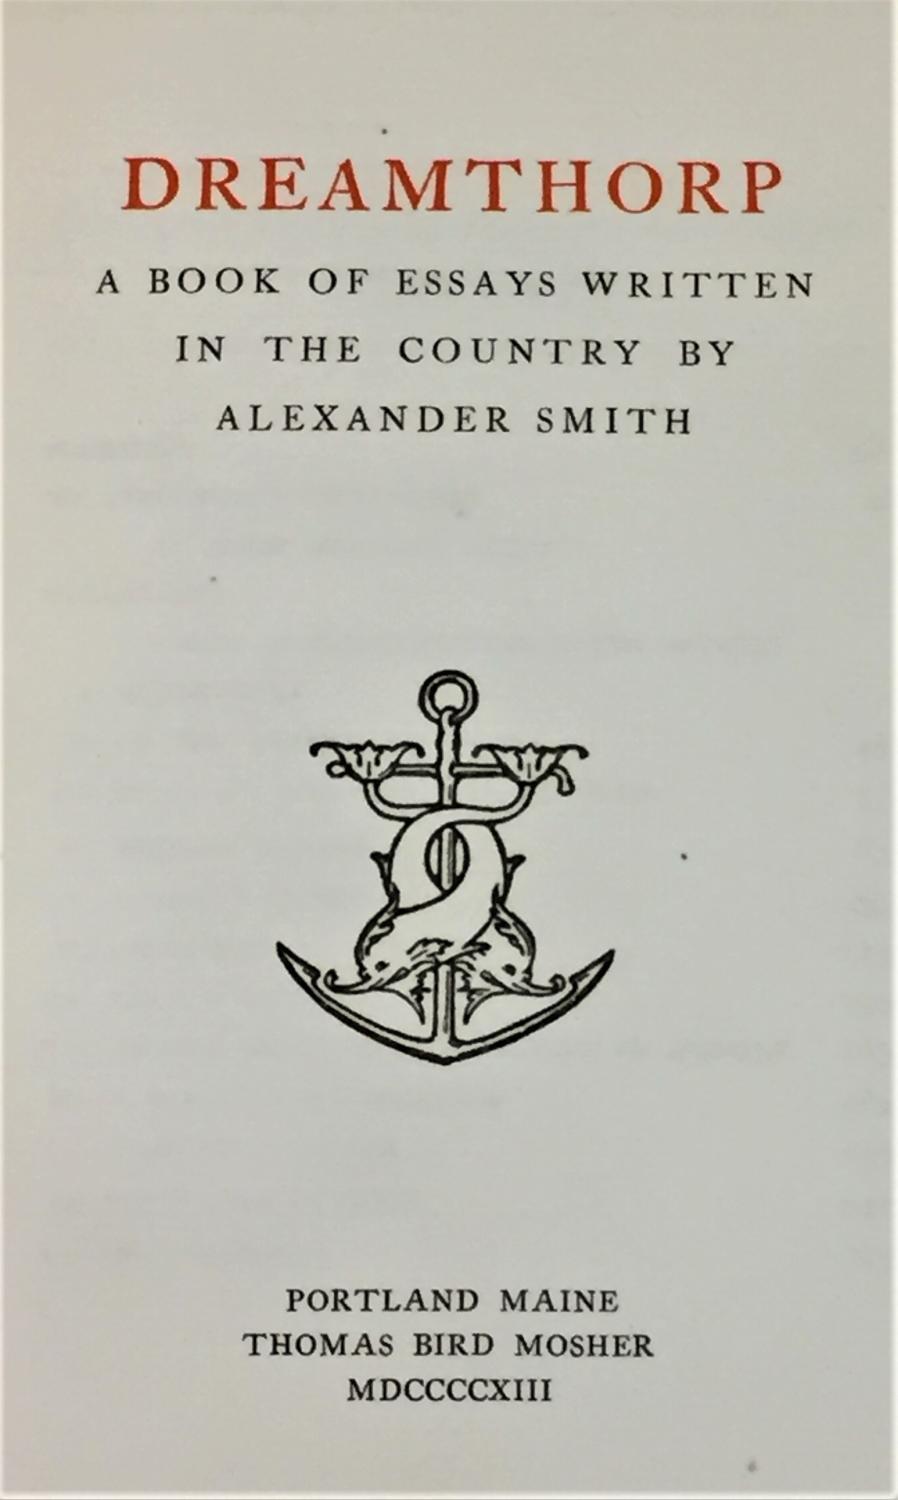 dreamthorp essays written in the country